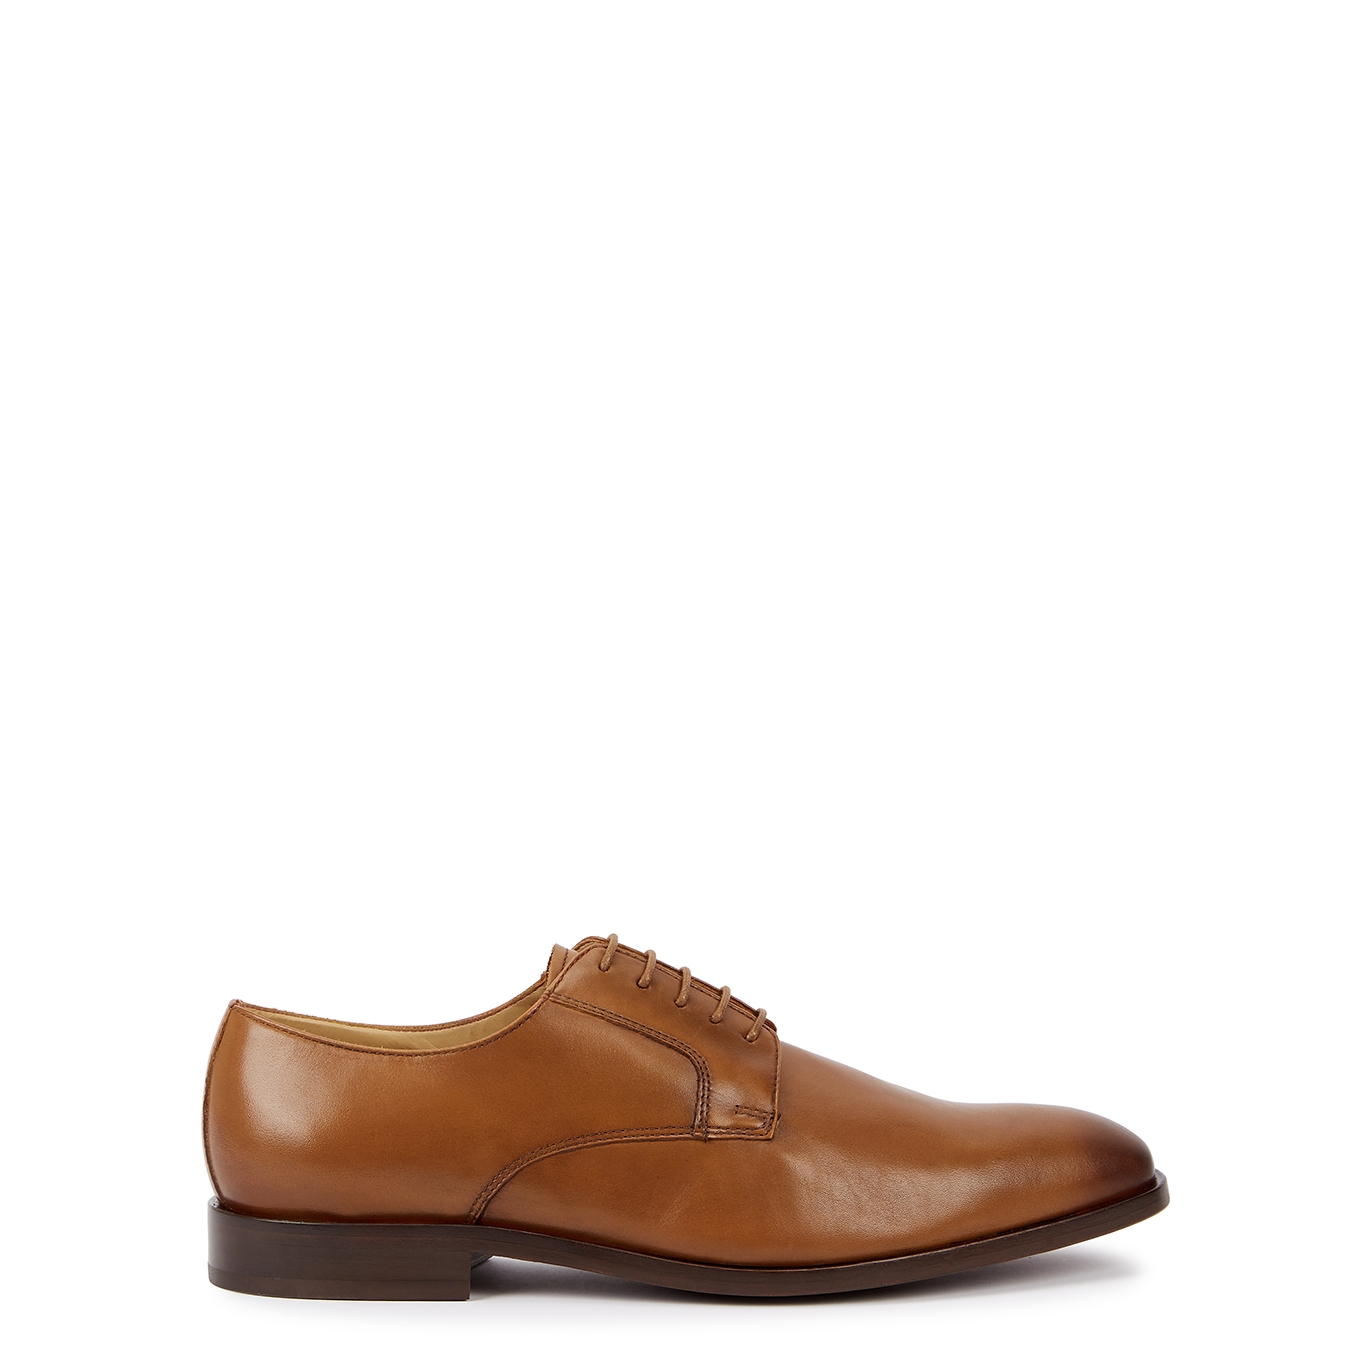 PS Paul Smith Rufus Brown Leather Derby Shoes - TAN - 7